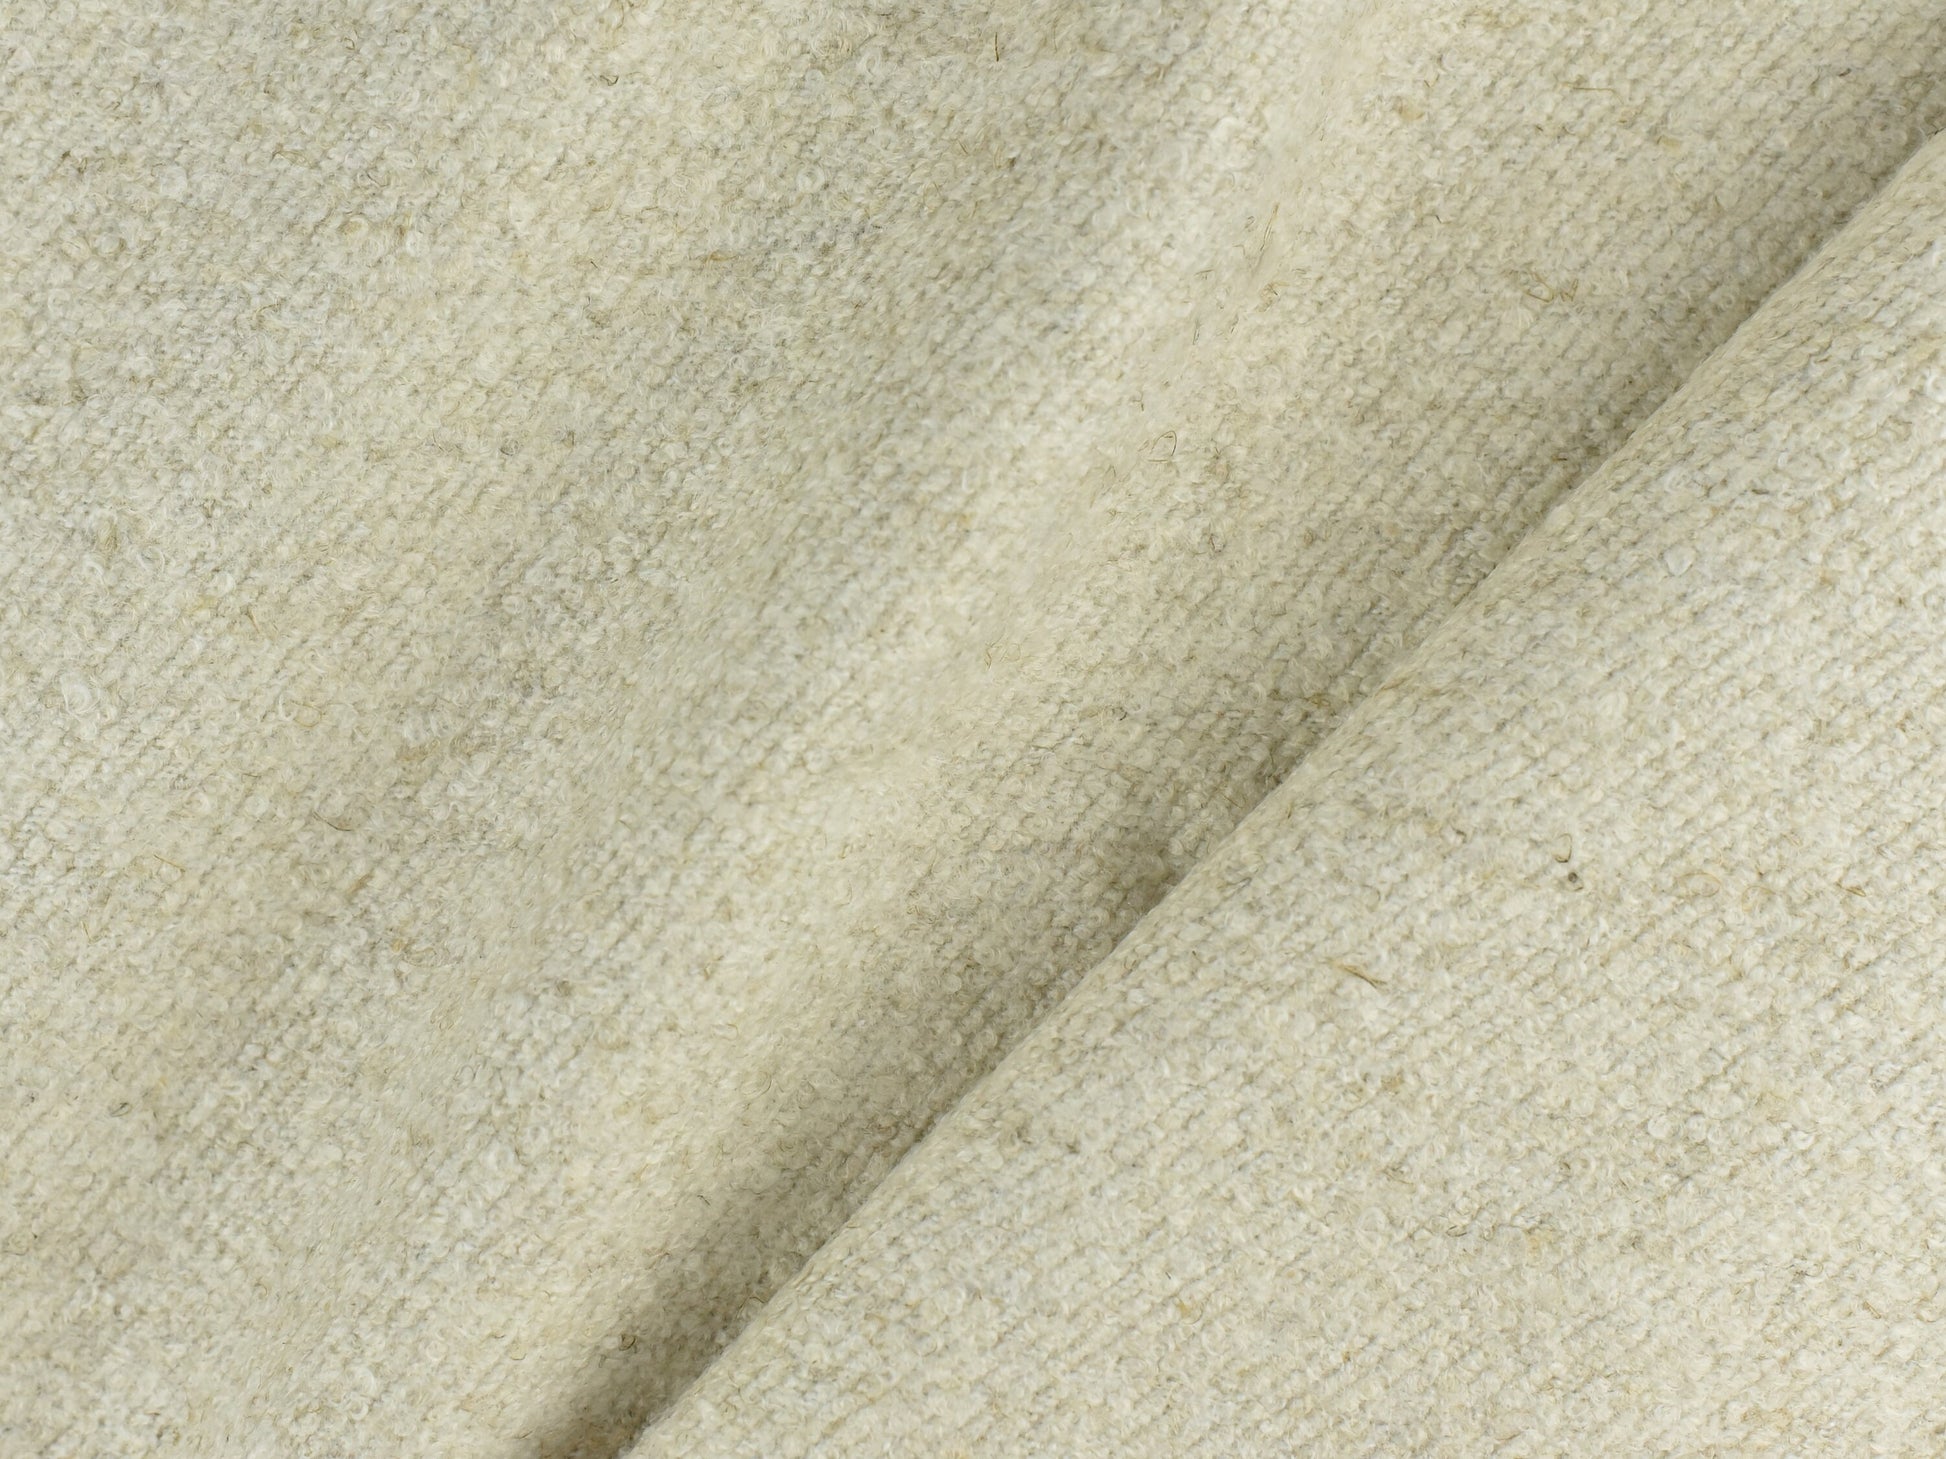 Designer Heavy Weight Curly Boucle Upholstery Fabric|Sherpa Textured Linen Blended Fabric Home Decor Fabric